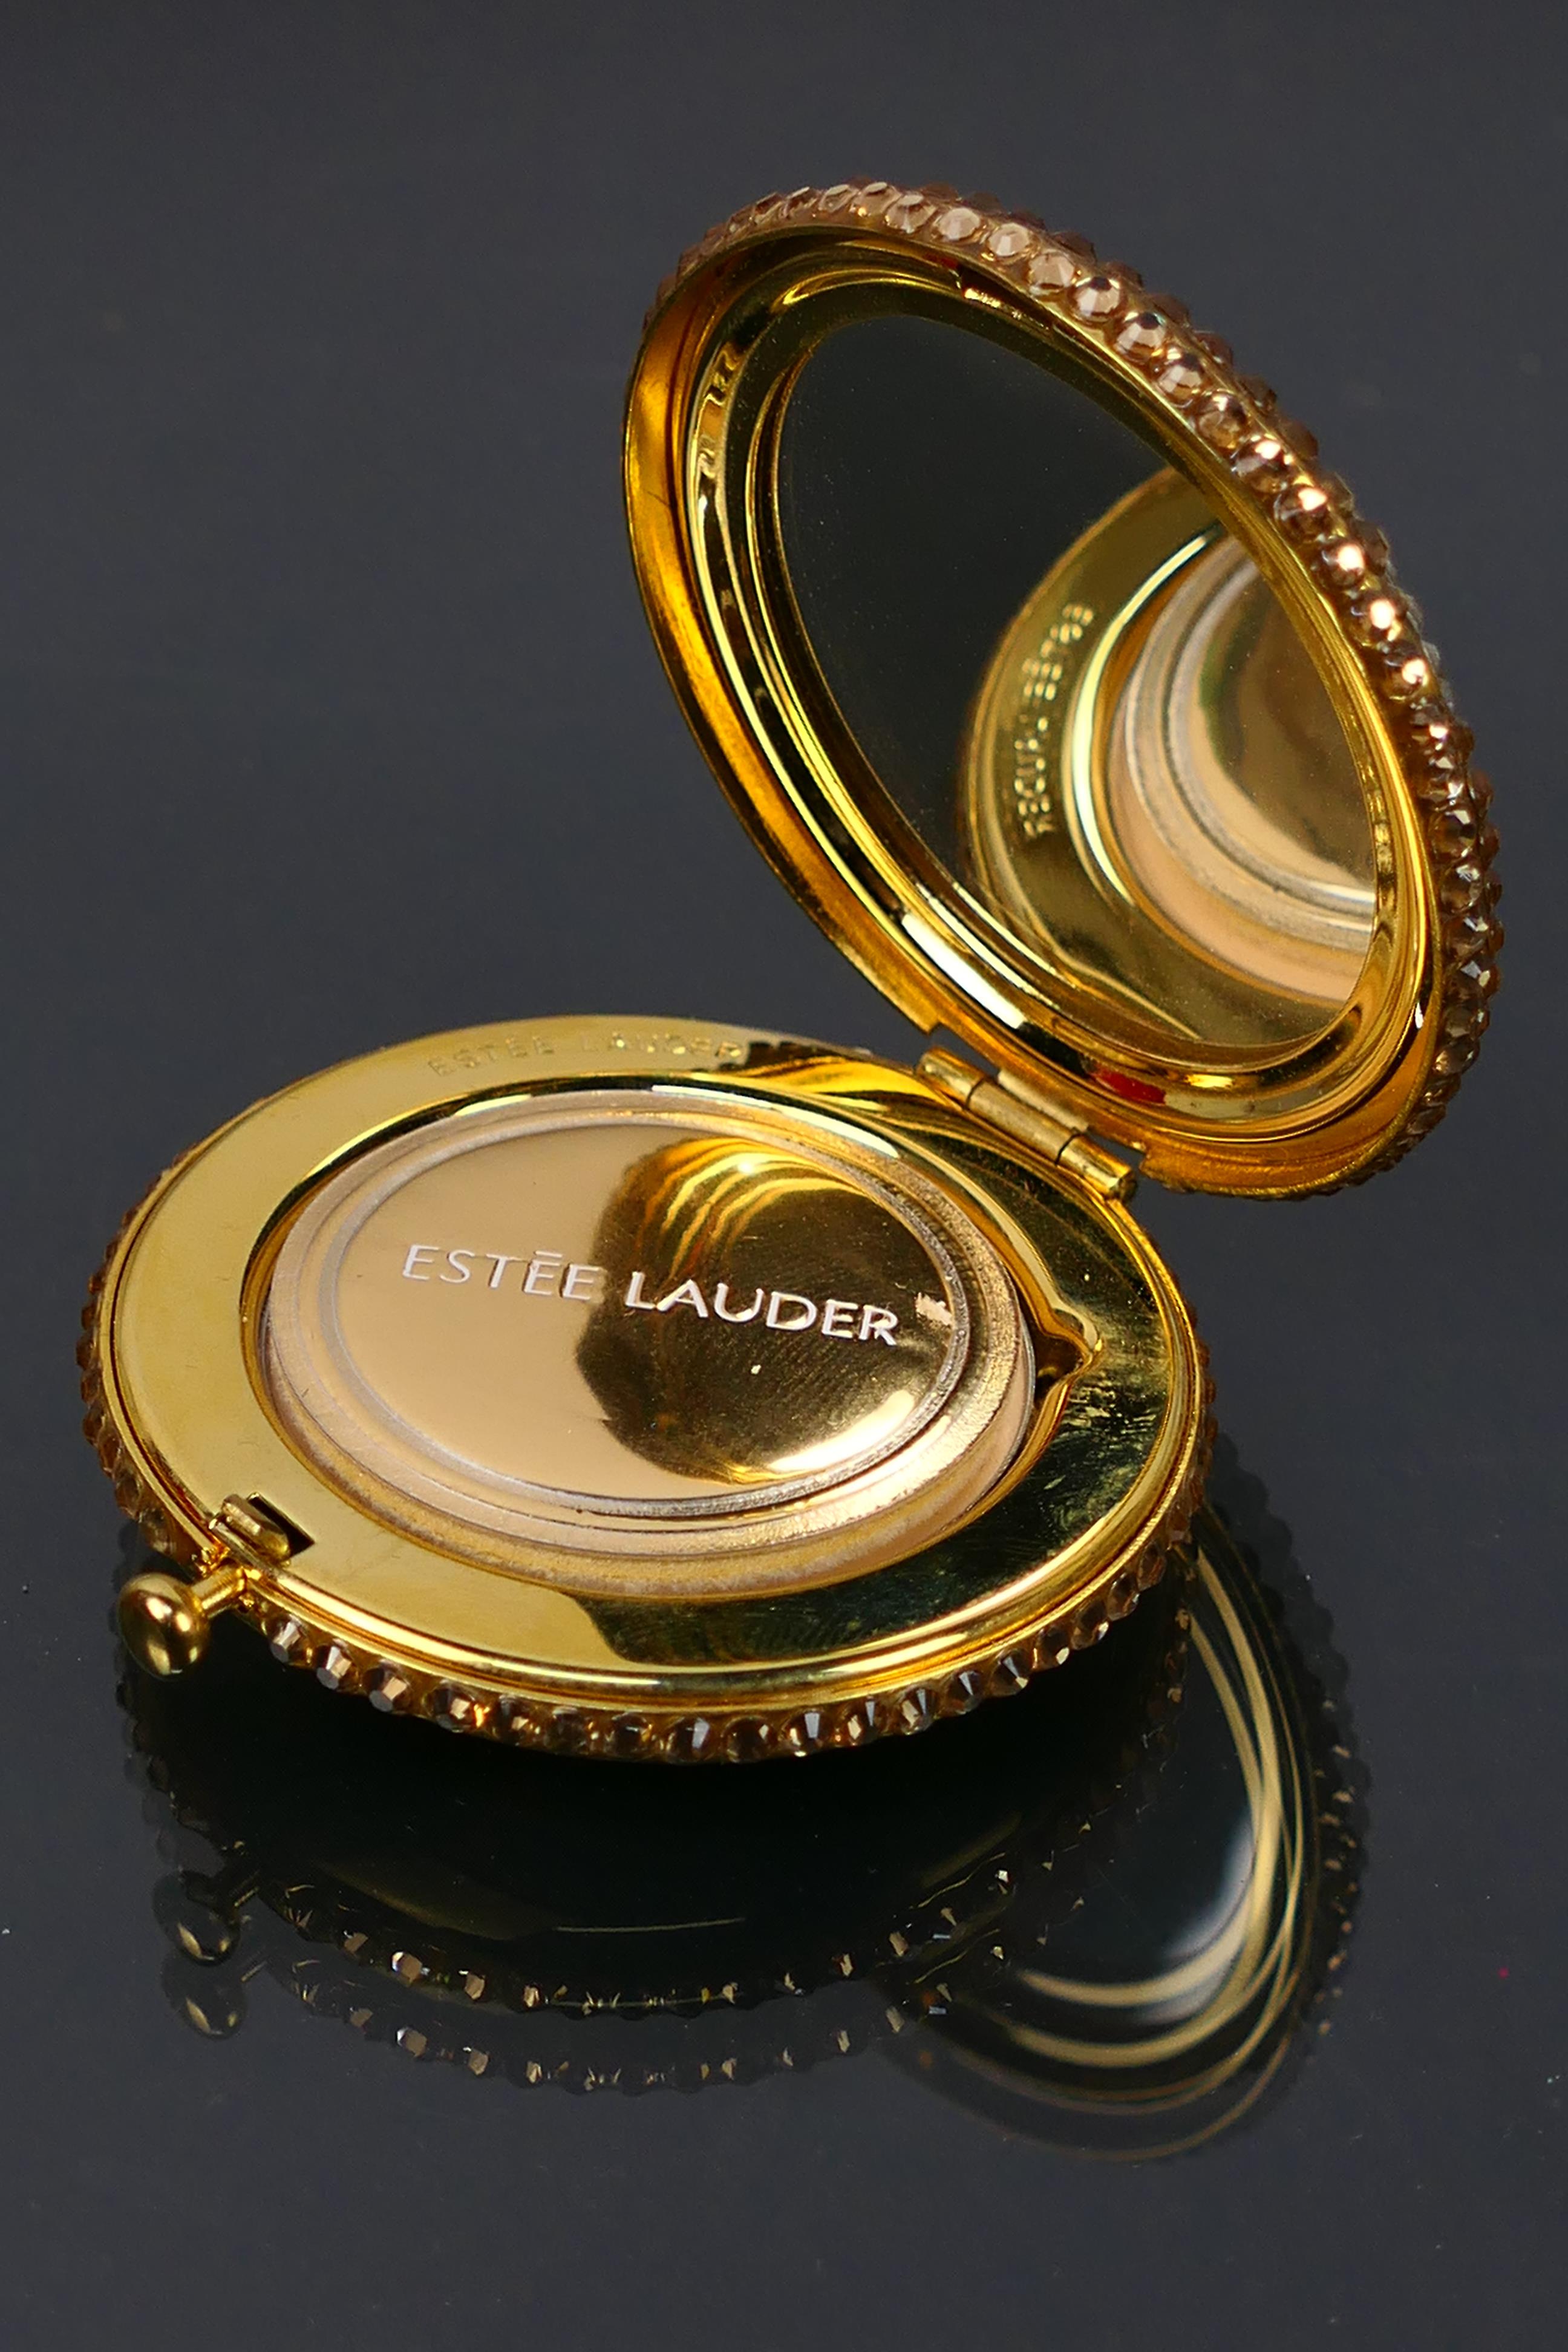 Estee Lauder - 2 x boxed gilt metal Estee Lauder powder compacts - Lot includes a Bamboo Weave - Image 8 of 10